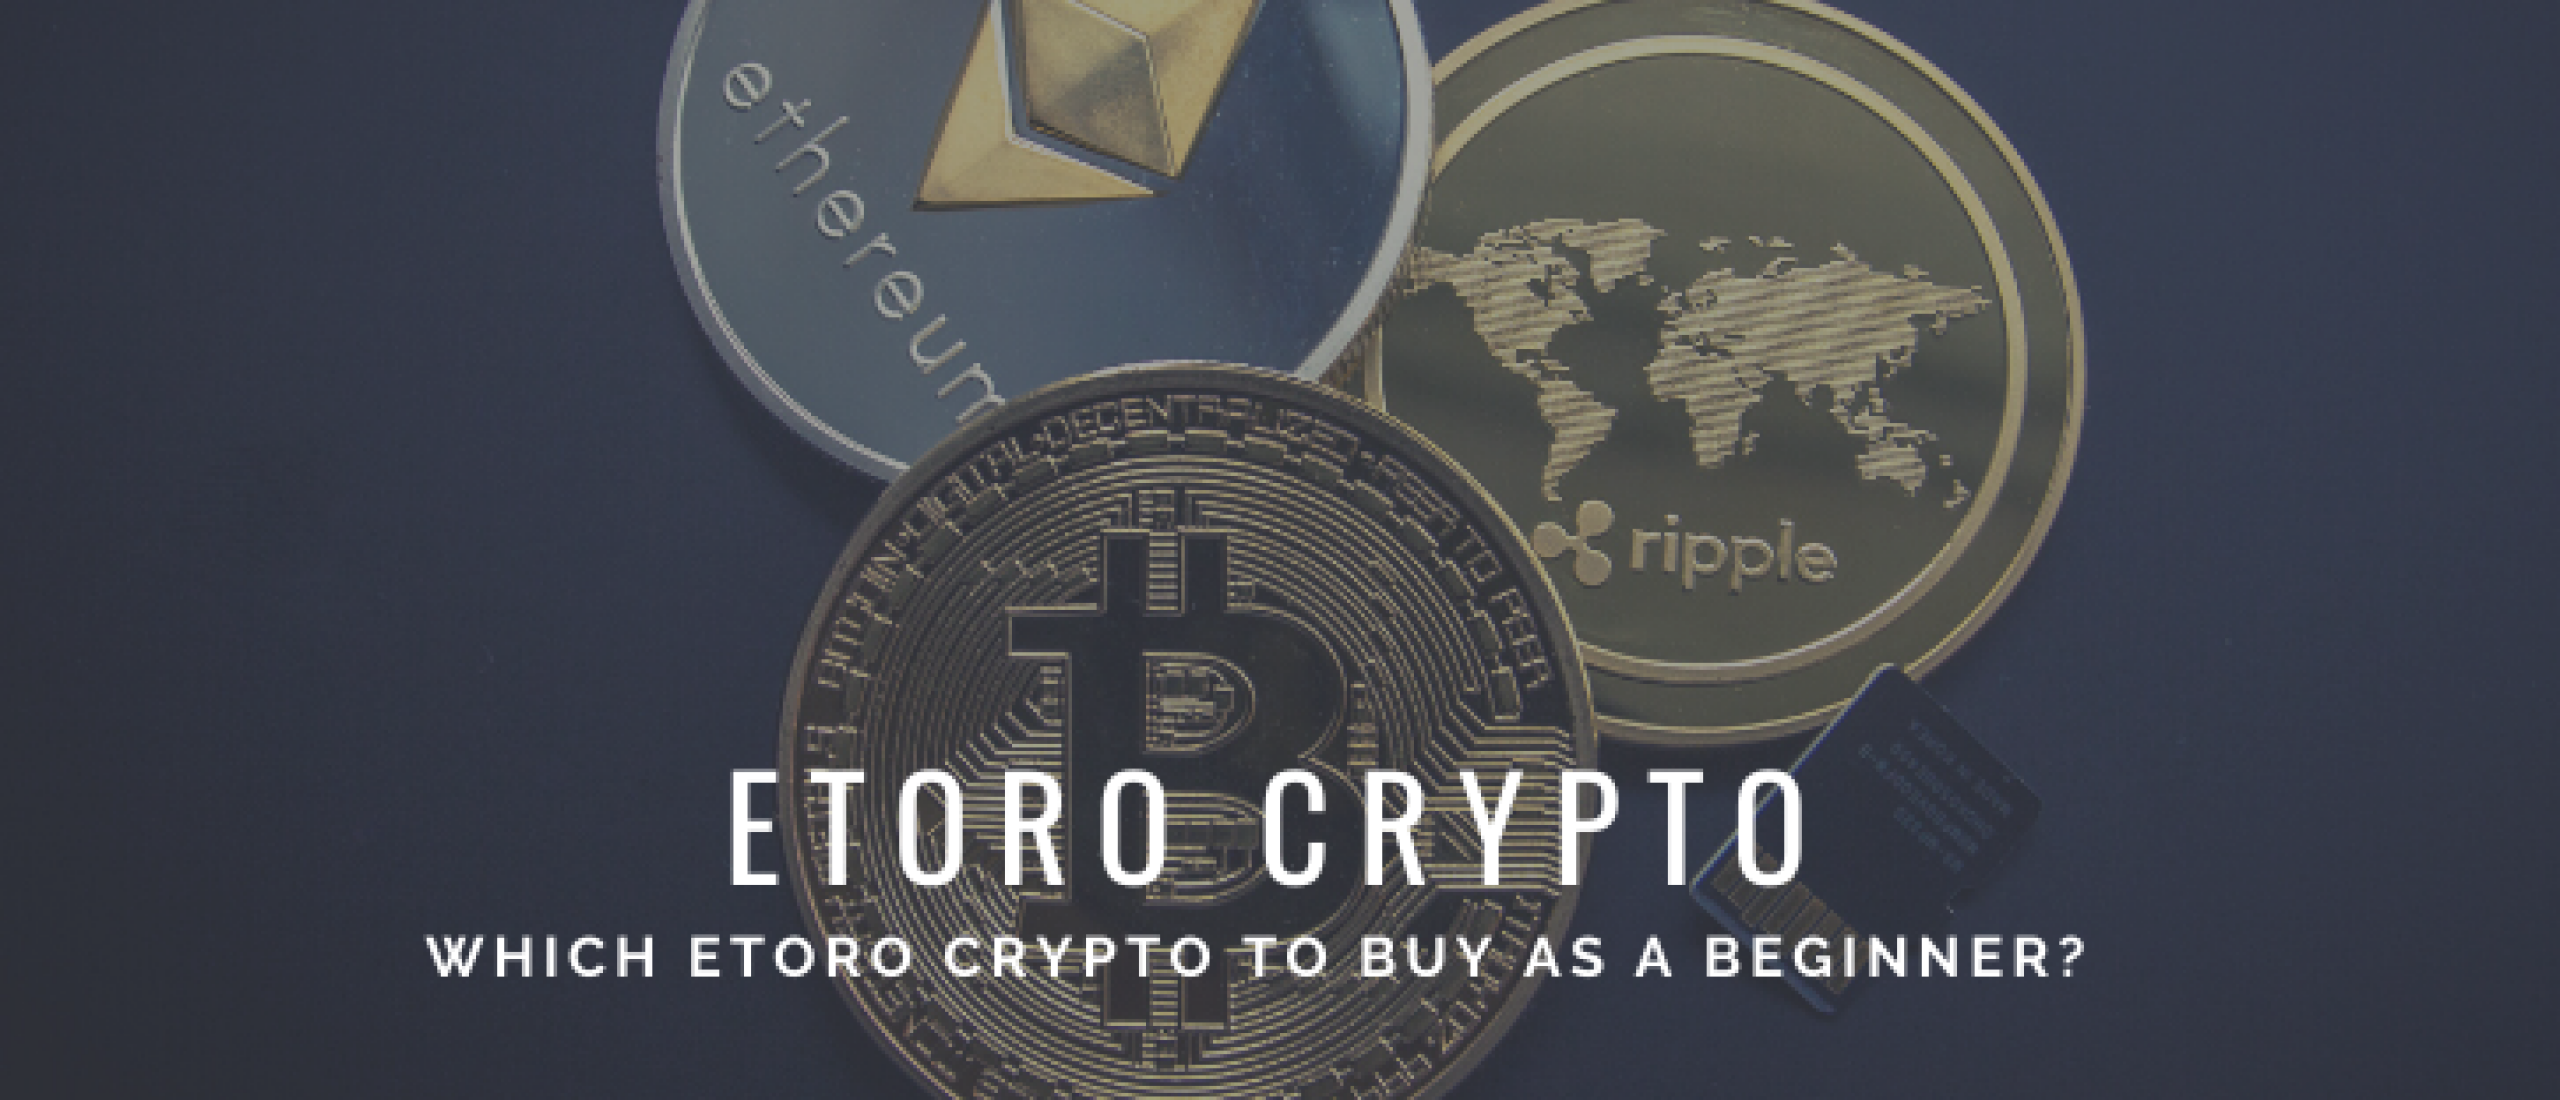 Which eToro Crypto to Buy as a Beginner? Tips to Begin